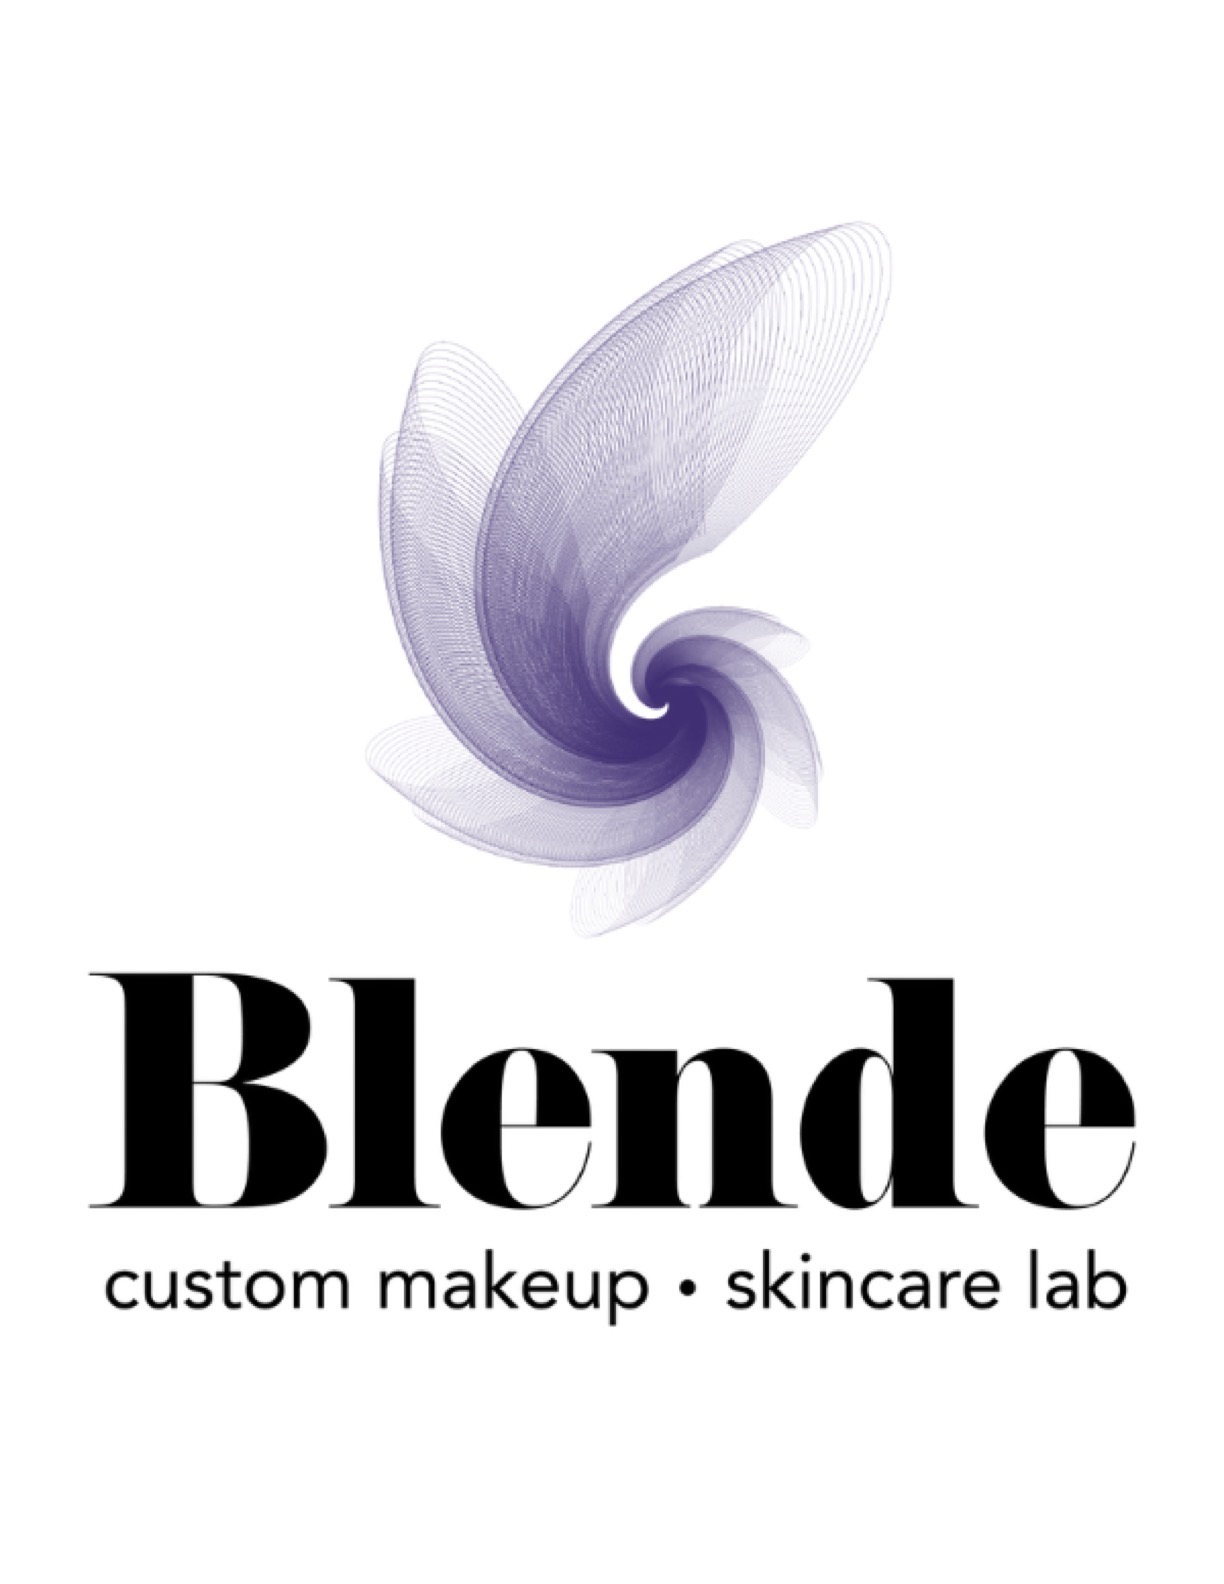 Blende Custom Makeup and Skincare is Franchising Nationwide